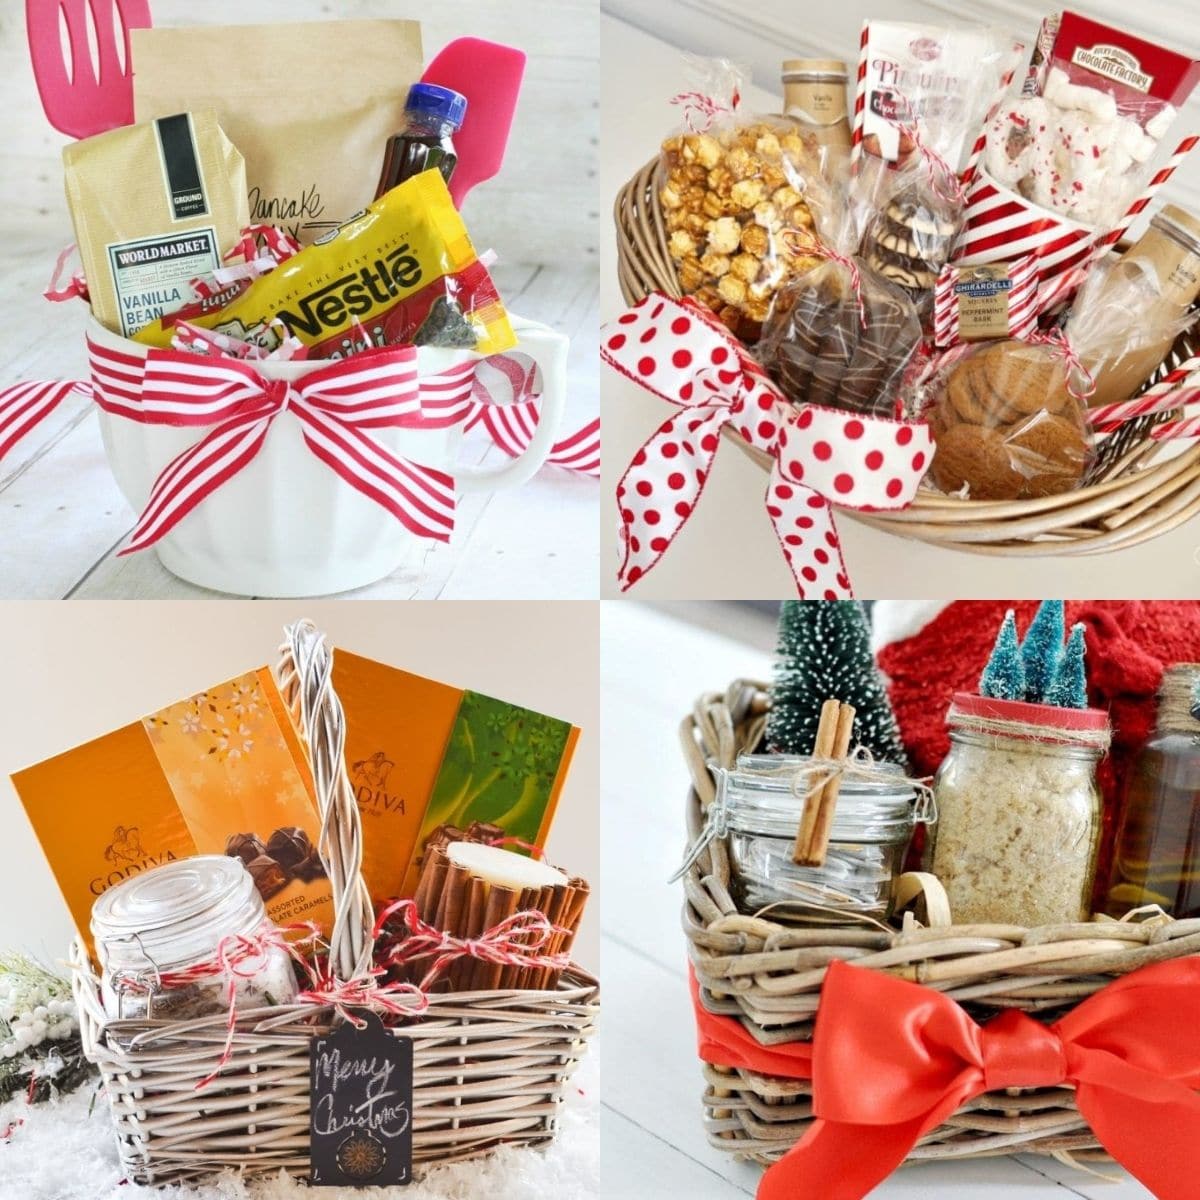 Gift Baskets to India. Exclusive Gift Baskets.